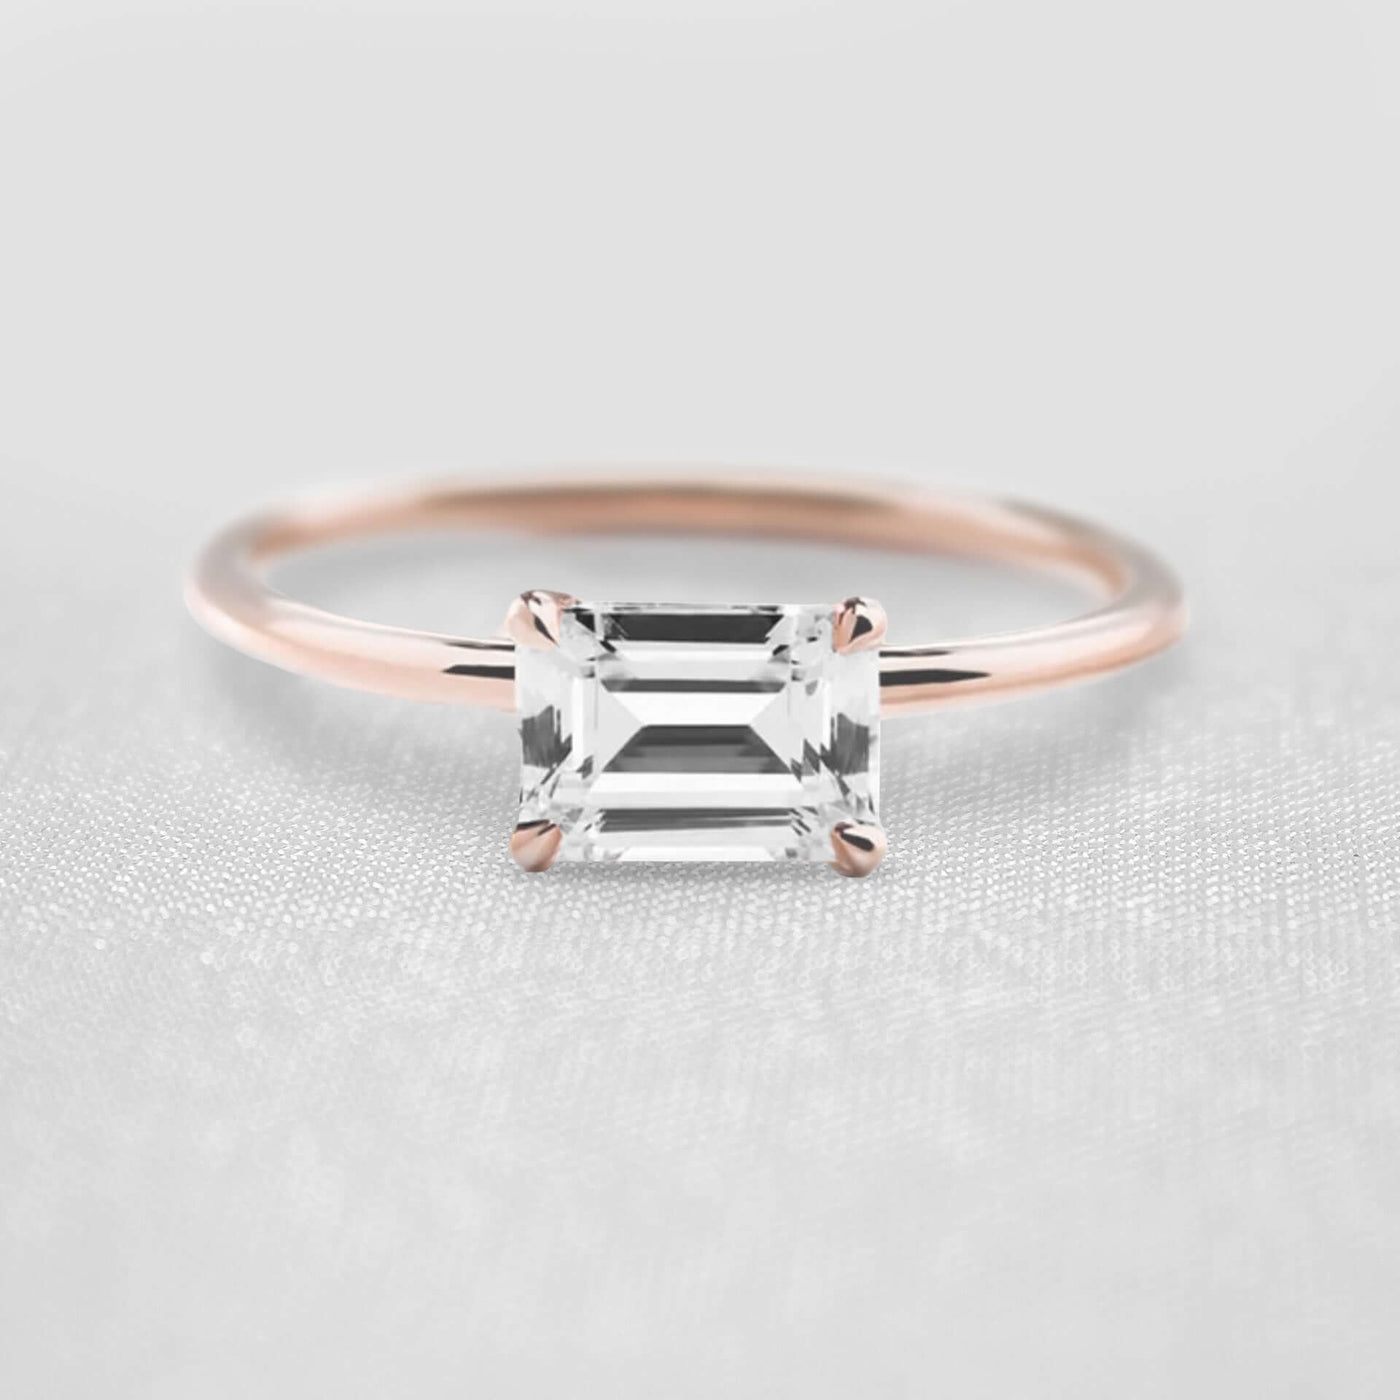 Shown in 1.0 Carat * The Mia East West Emerald Cut Diamond Solitaire Engagement Ring | Lisa Robin#shape_emerald